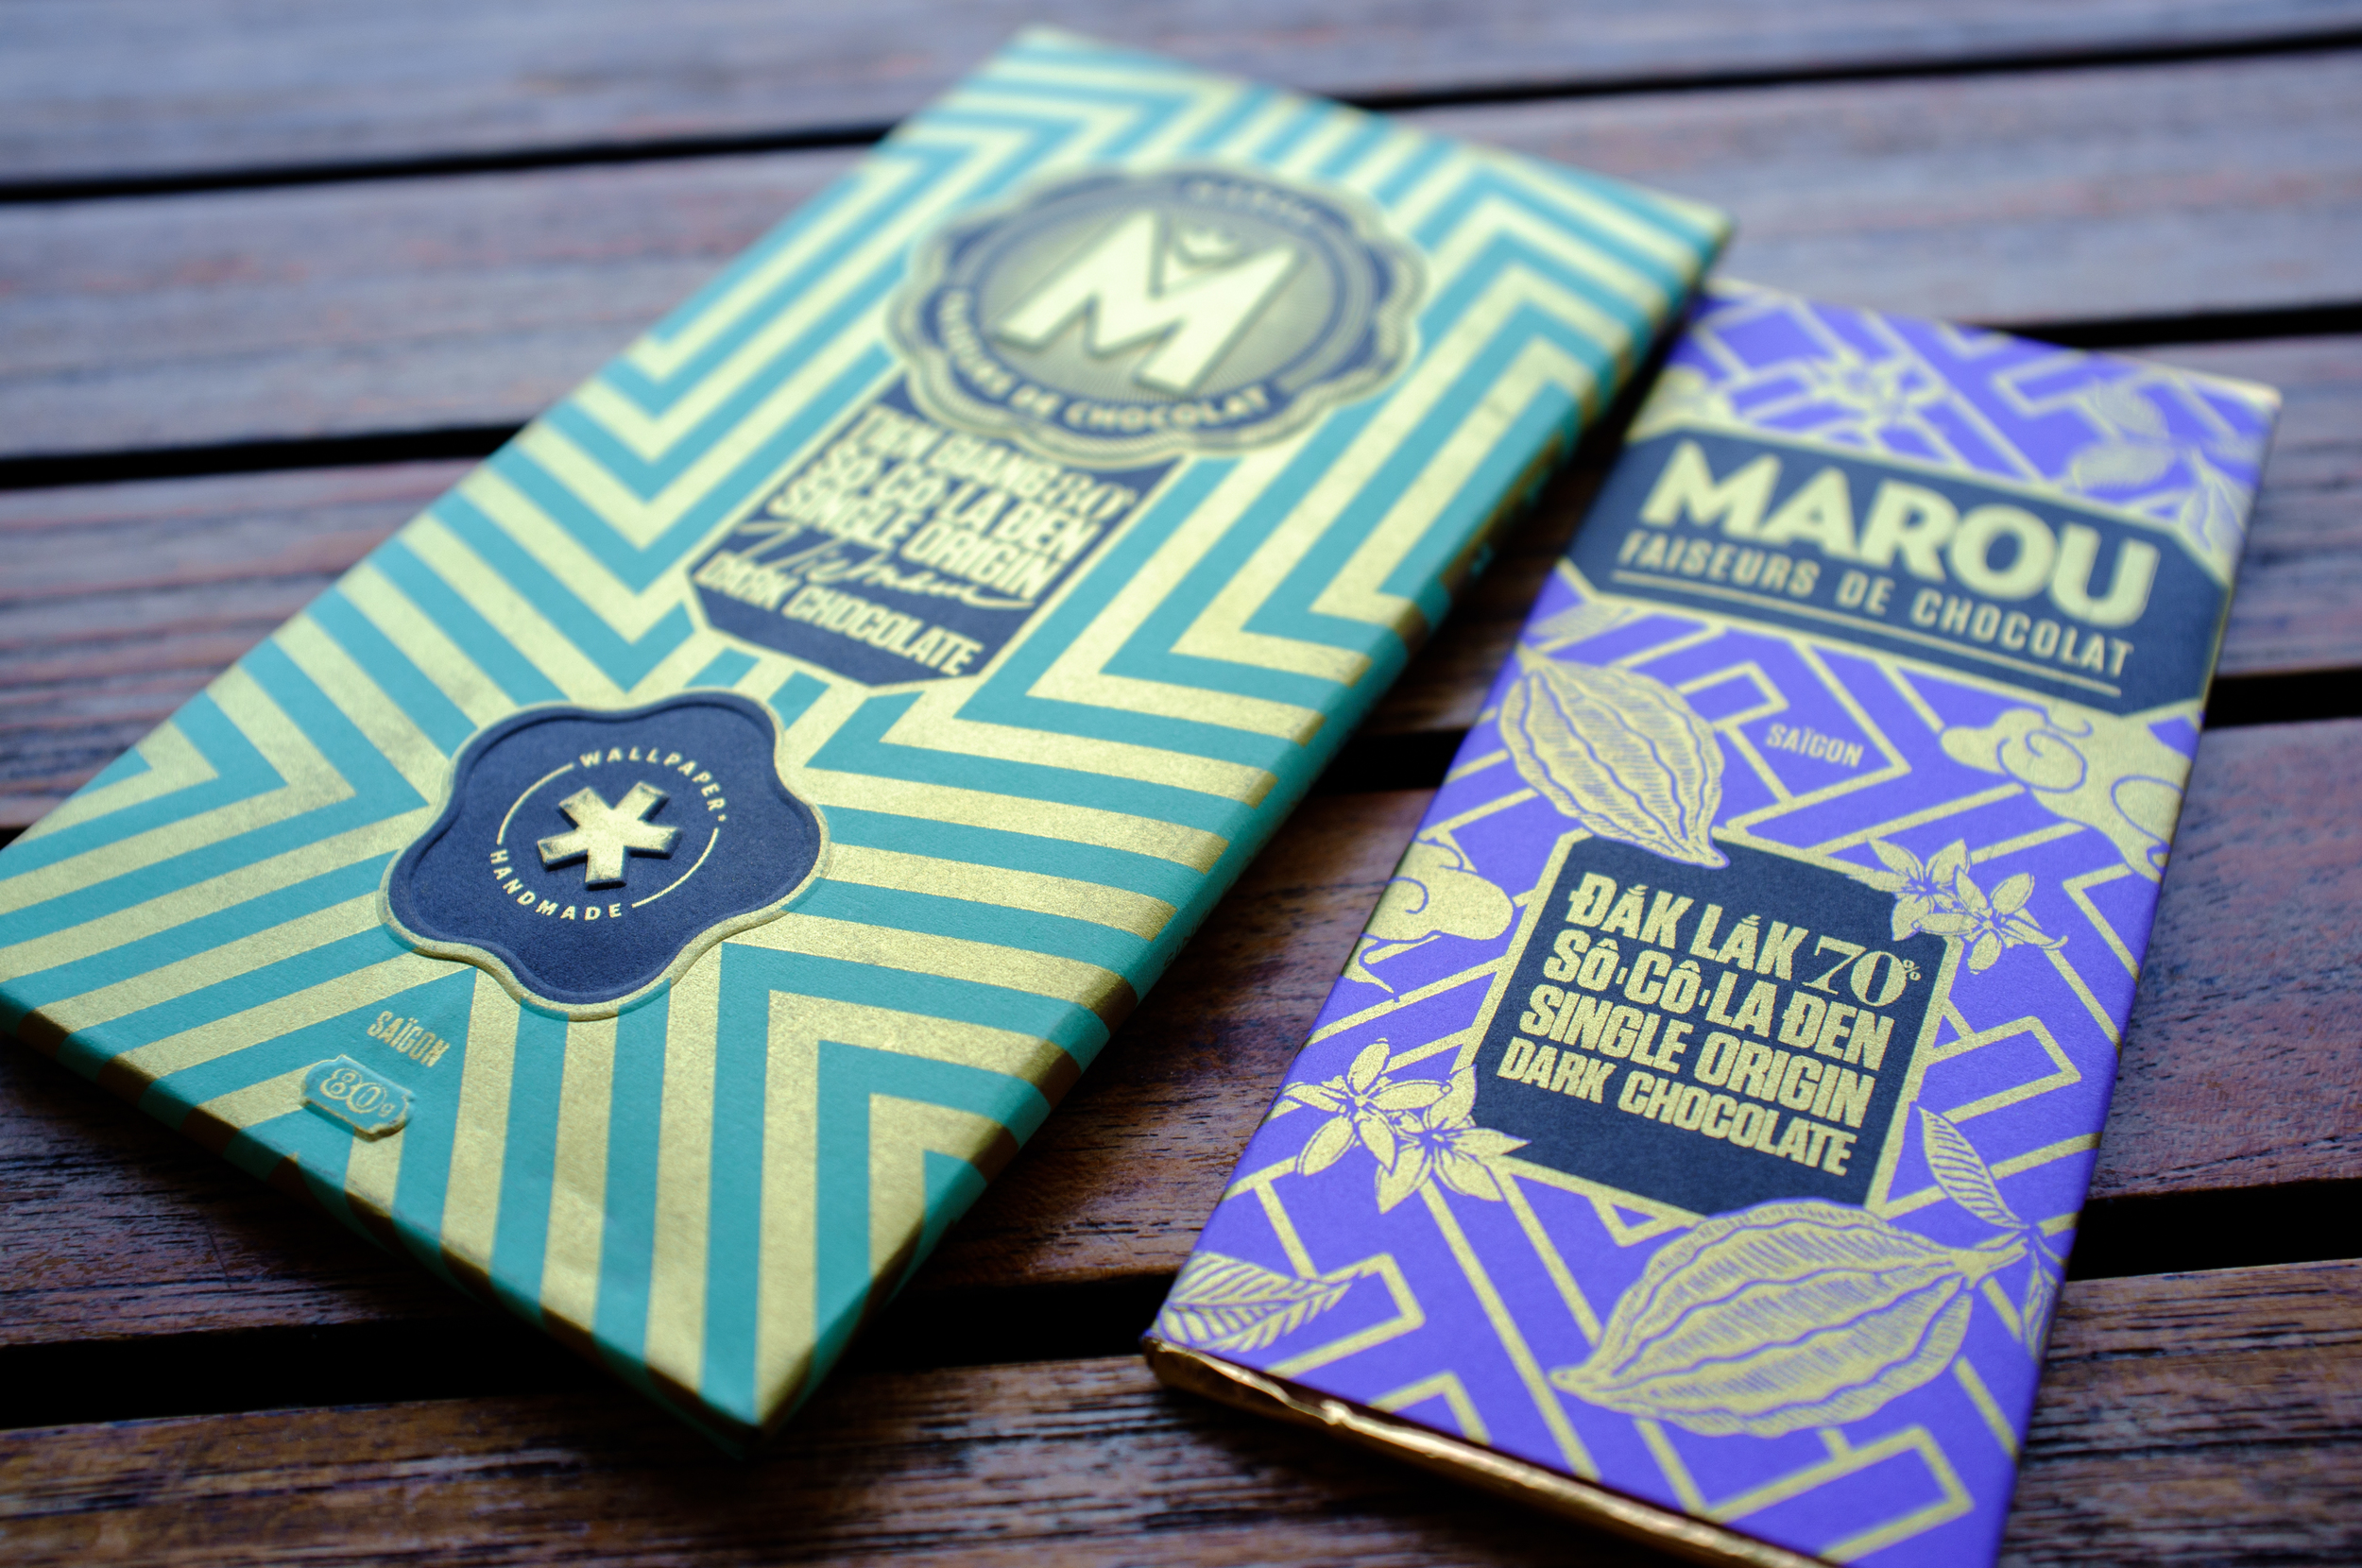 Marou Chocolate is a snack for chocolate enthusiasts